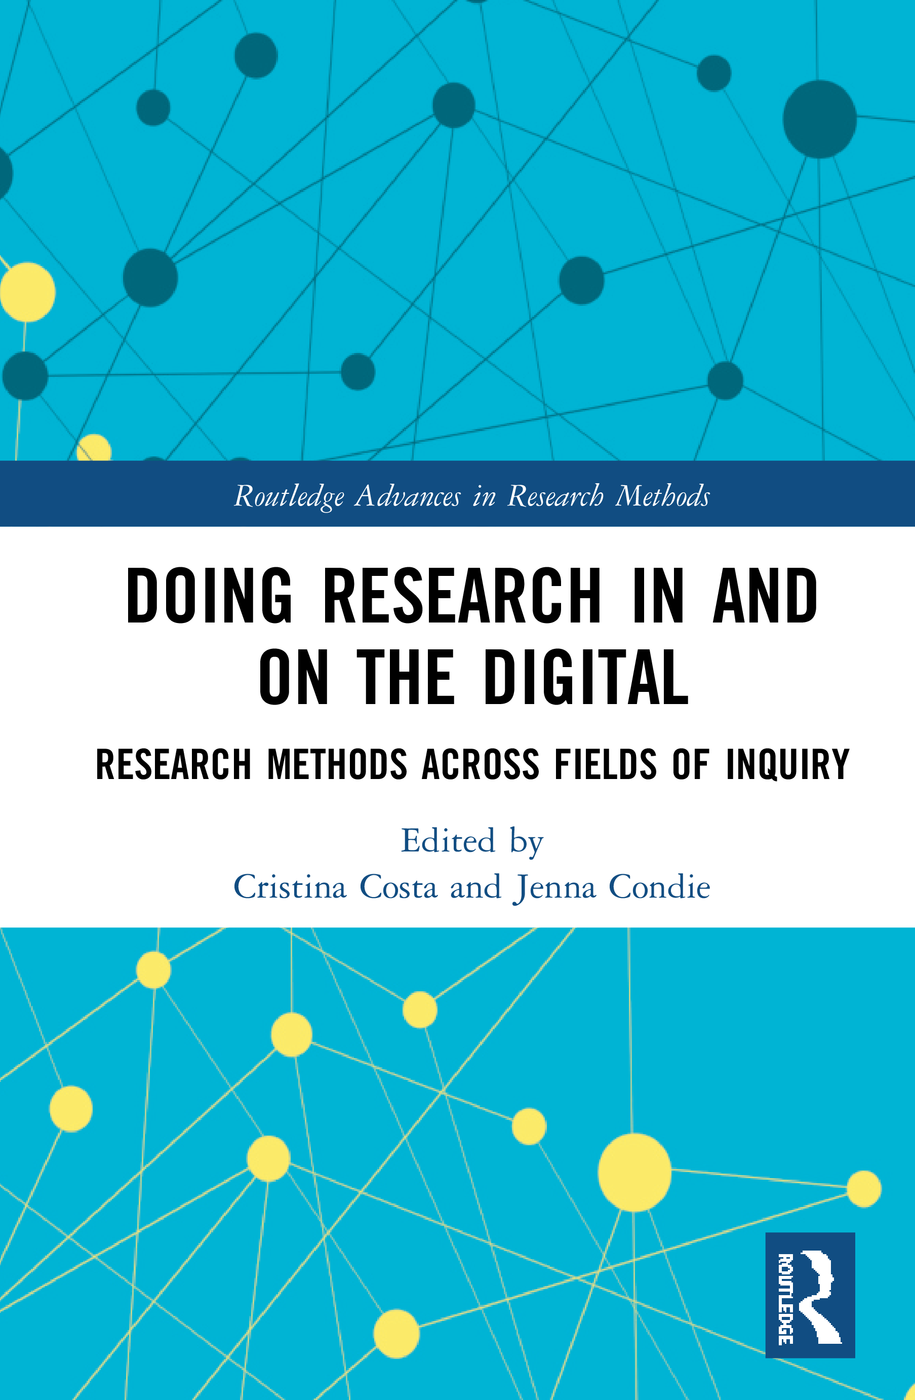 Doing Research in and on the Digital